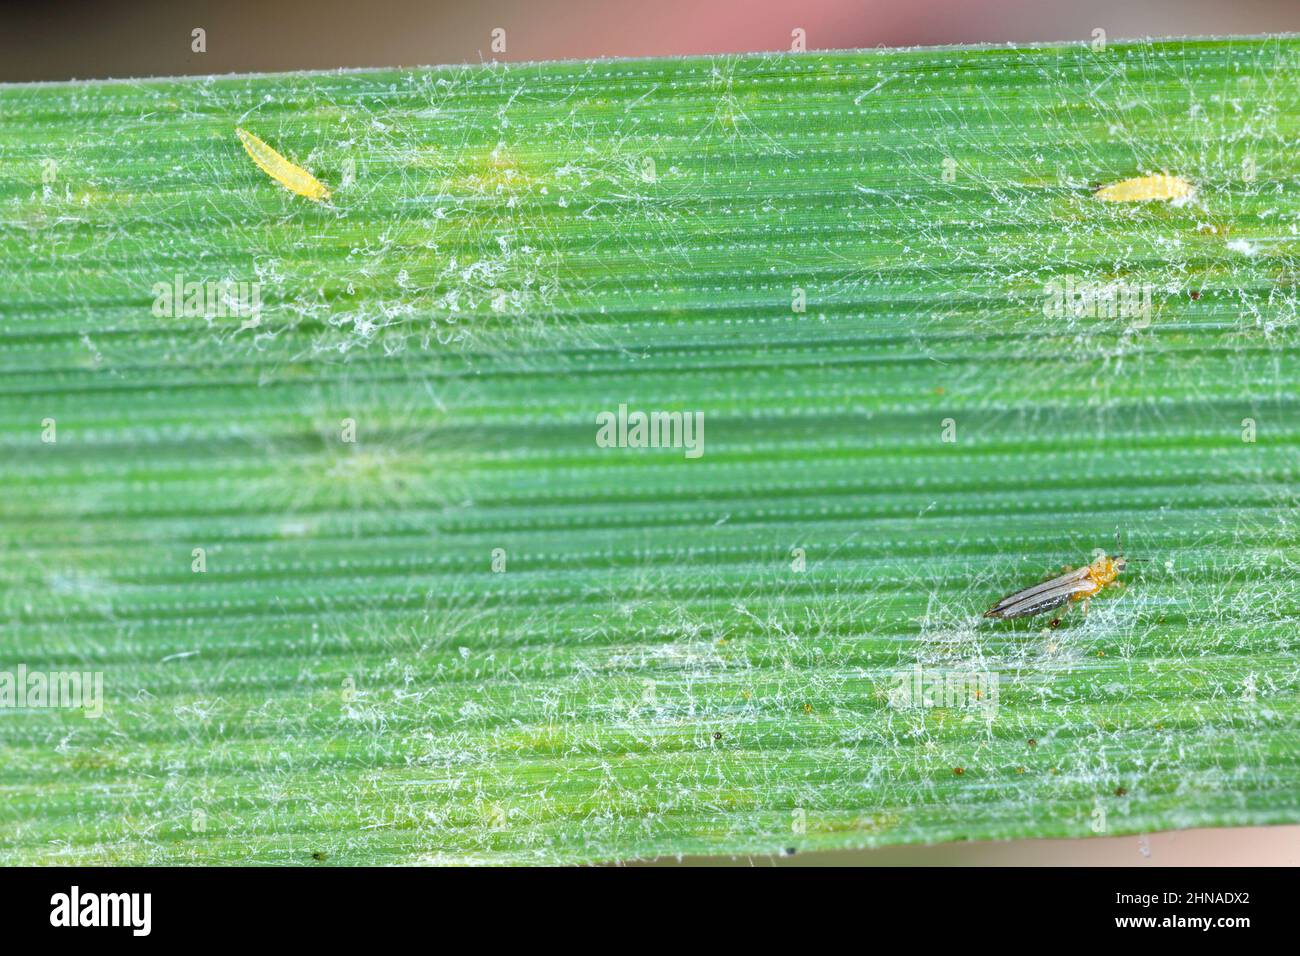 Thrips and powdery mildew on a cereal leaf. Stock Photo